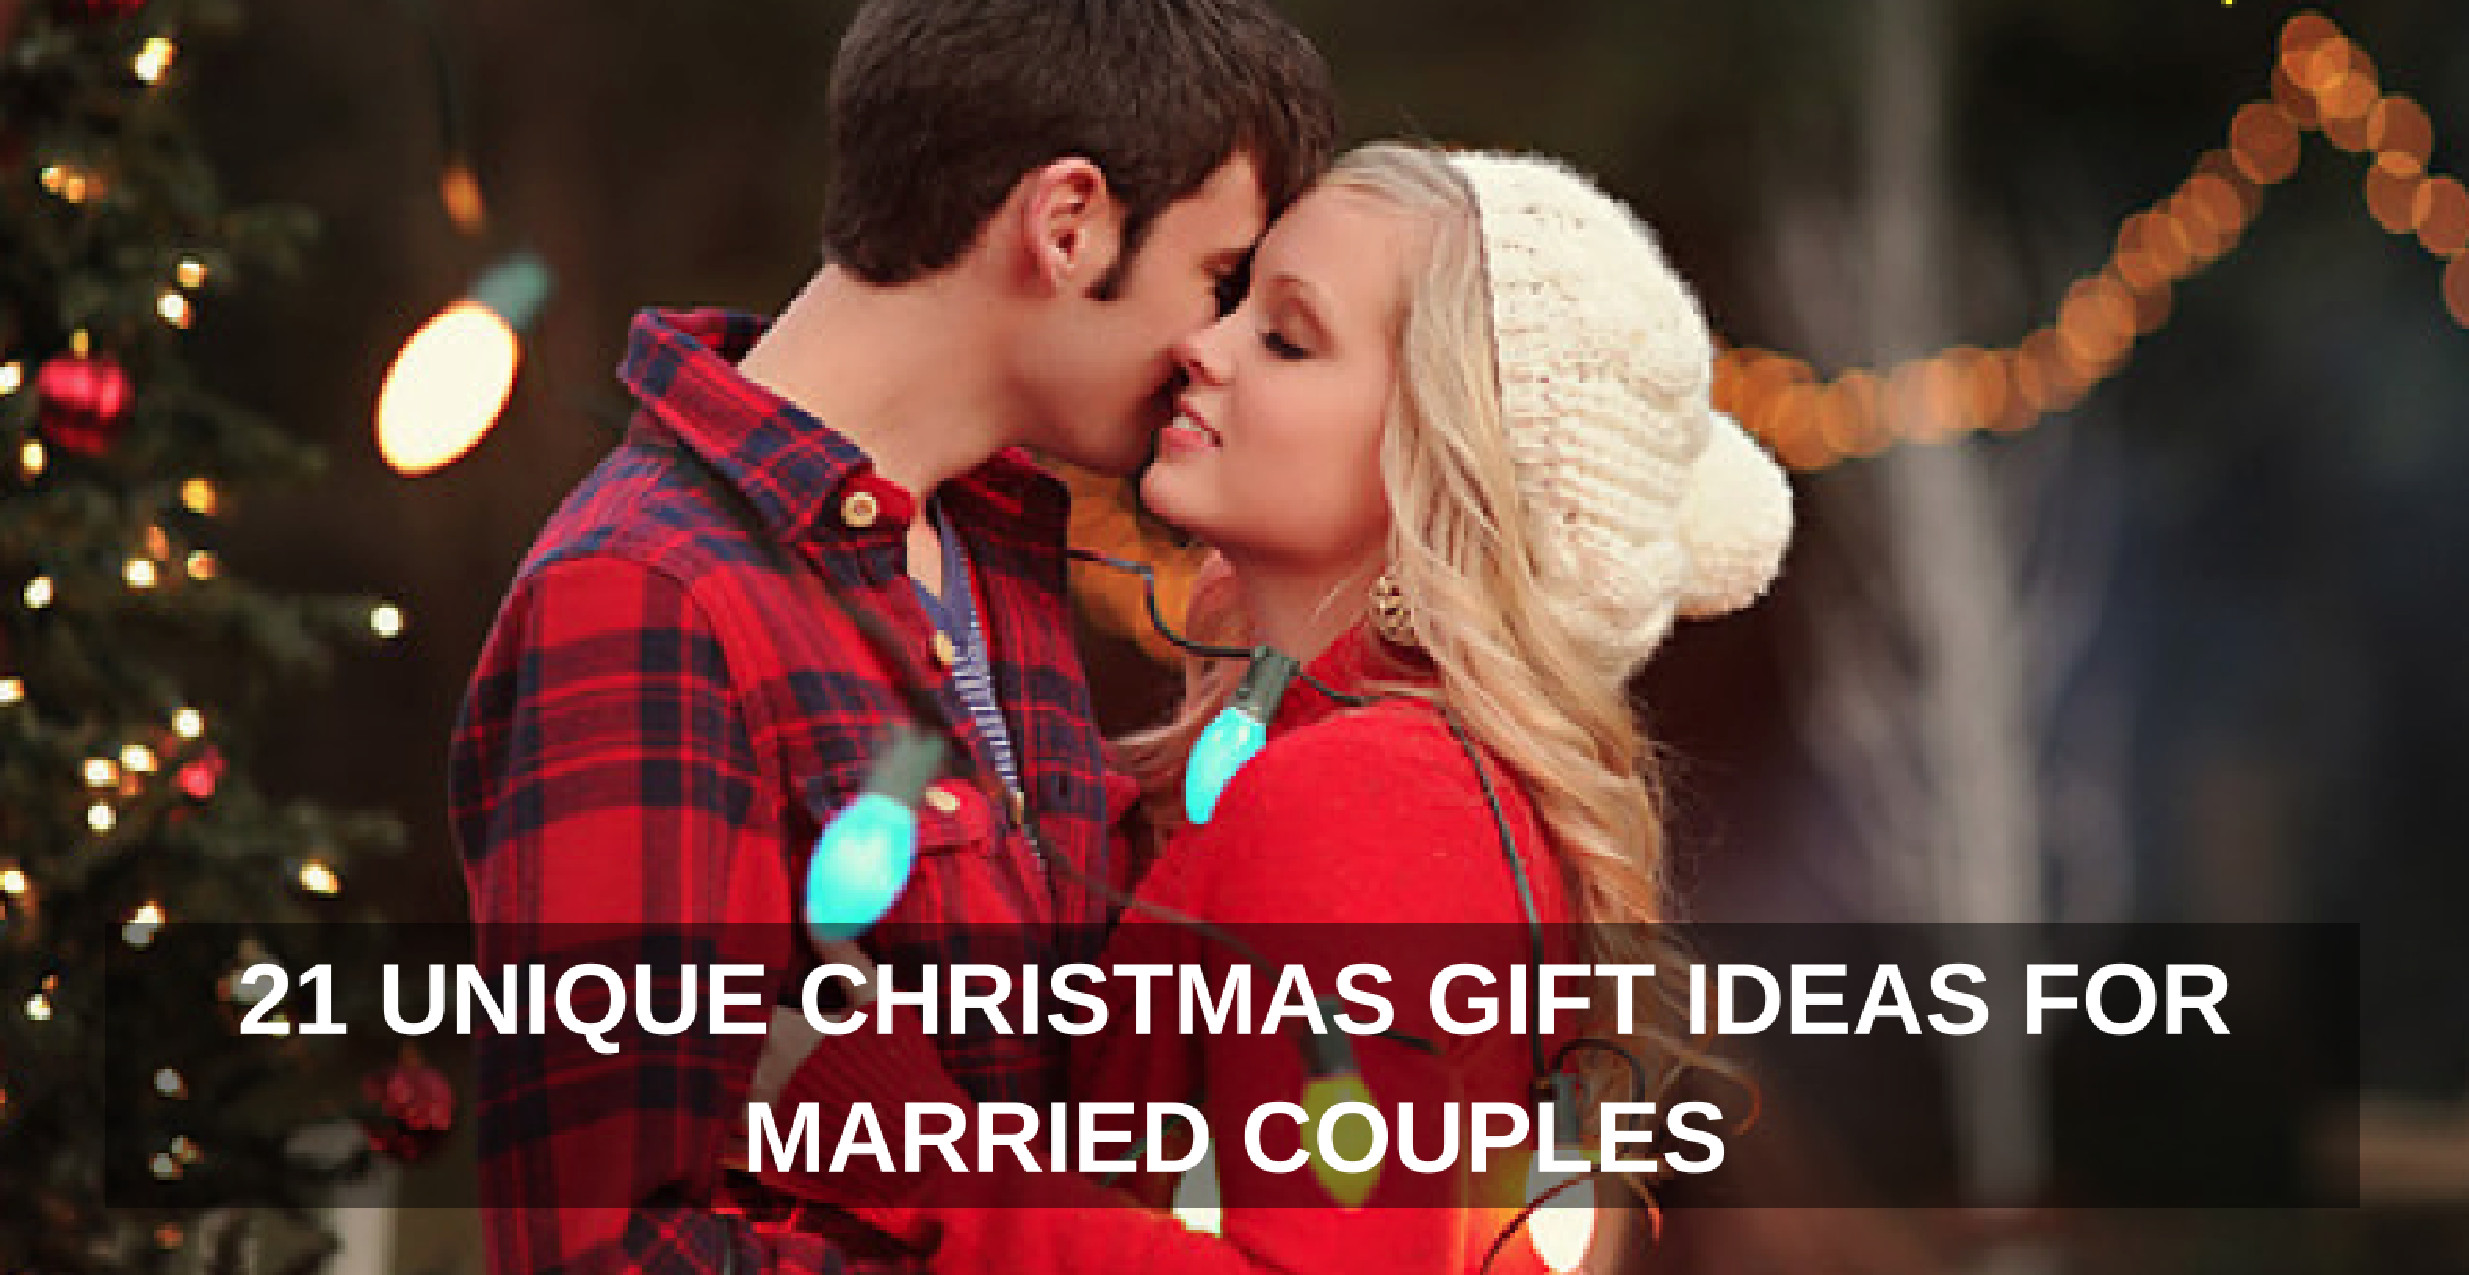 Couples Christmas Gift Ideas
 21 Unique Christmas Gift Ideas for Married Couples